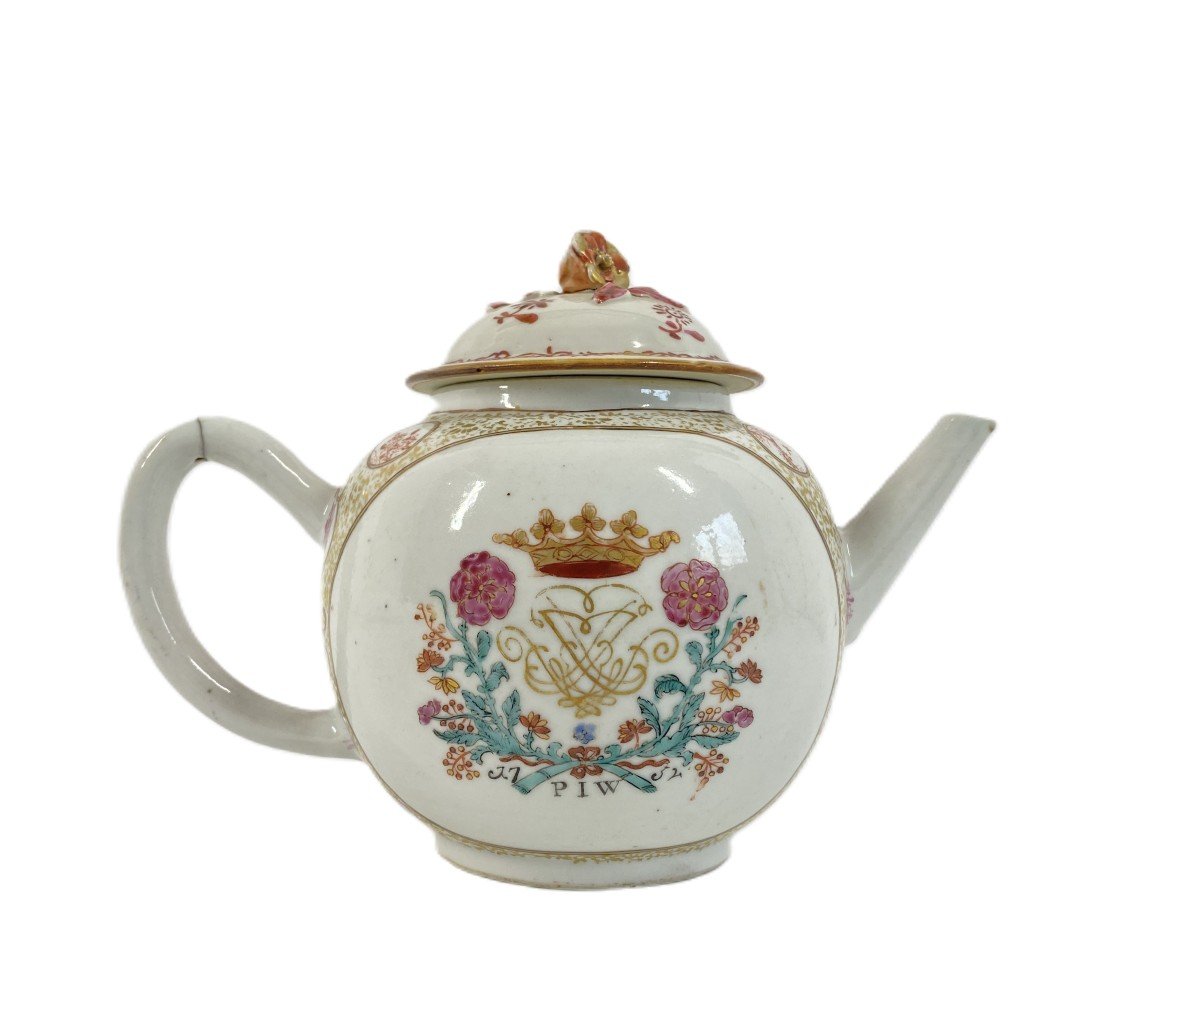 Chinese Porcelain Teapot Export Coat Of Arms Dated 1752 Famille Rose